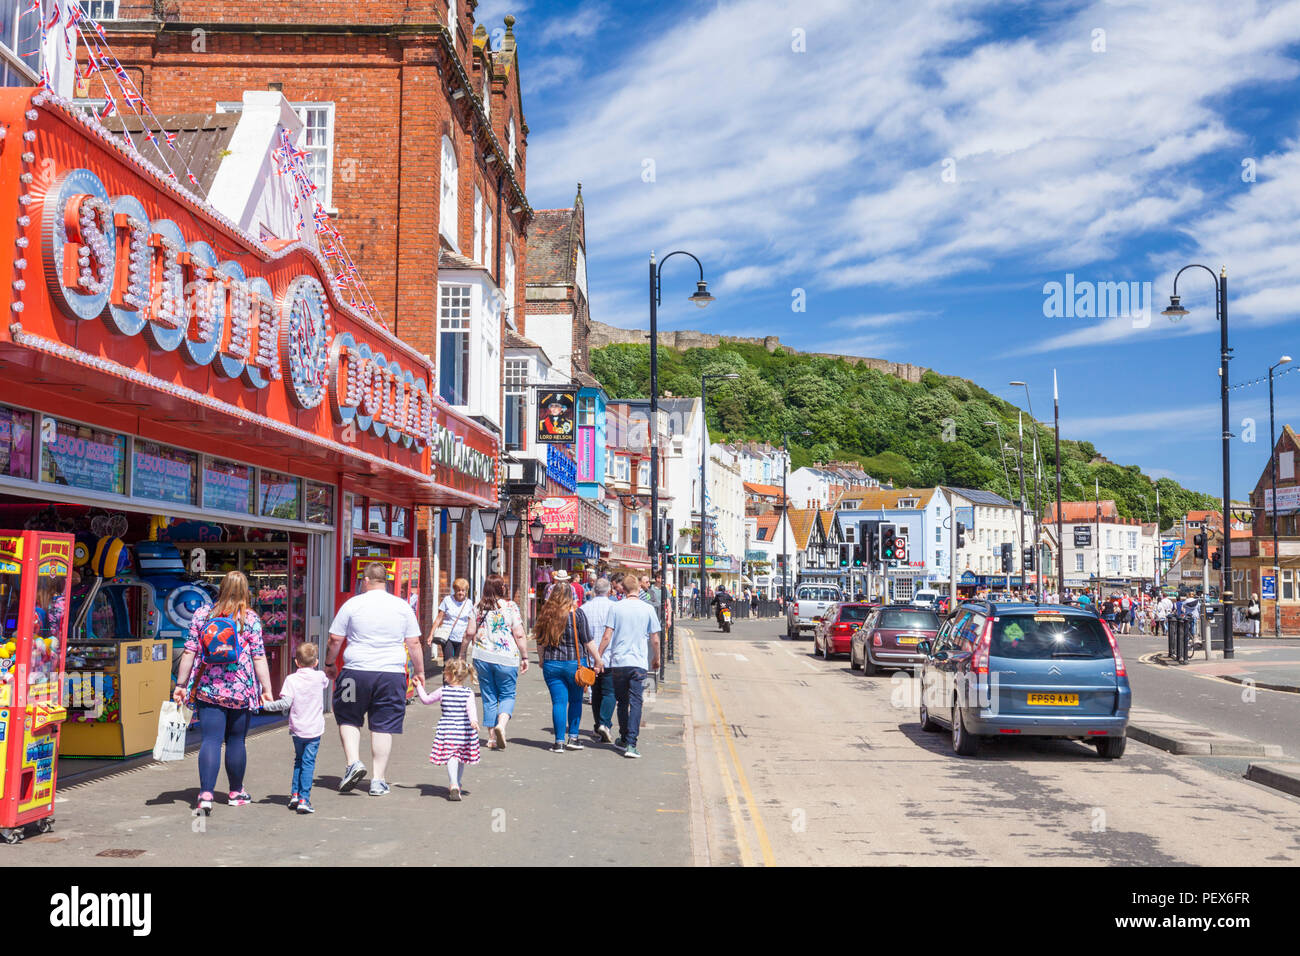 holidaymakers on Foreshore rd at scarborough beach south bay beach scarborough uk yorkshire north yorkshire scarborough england uk gb europe Stock Photo